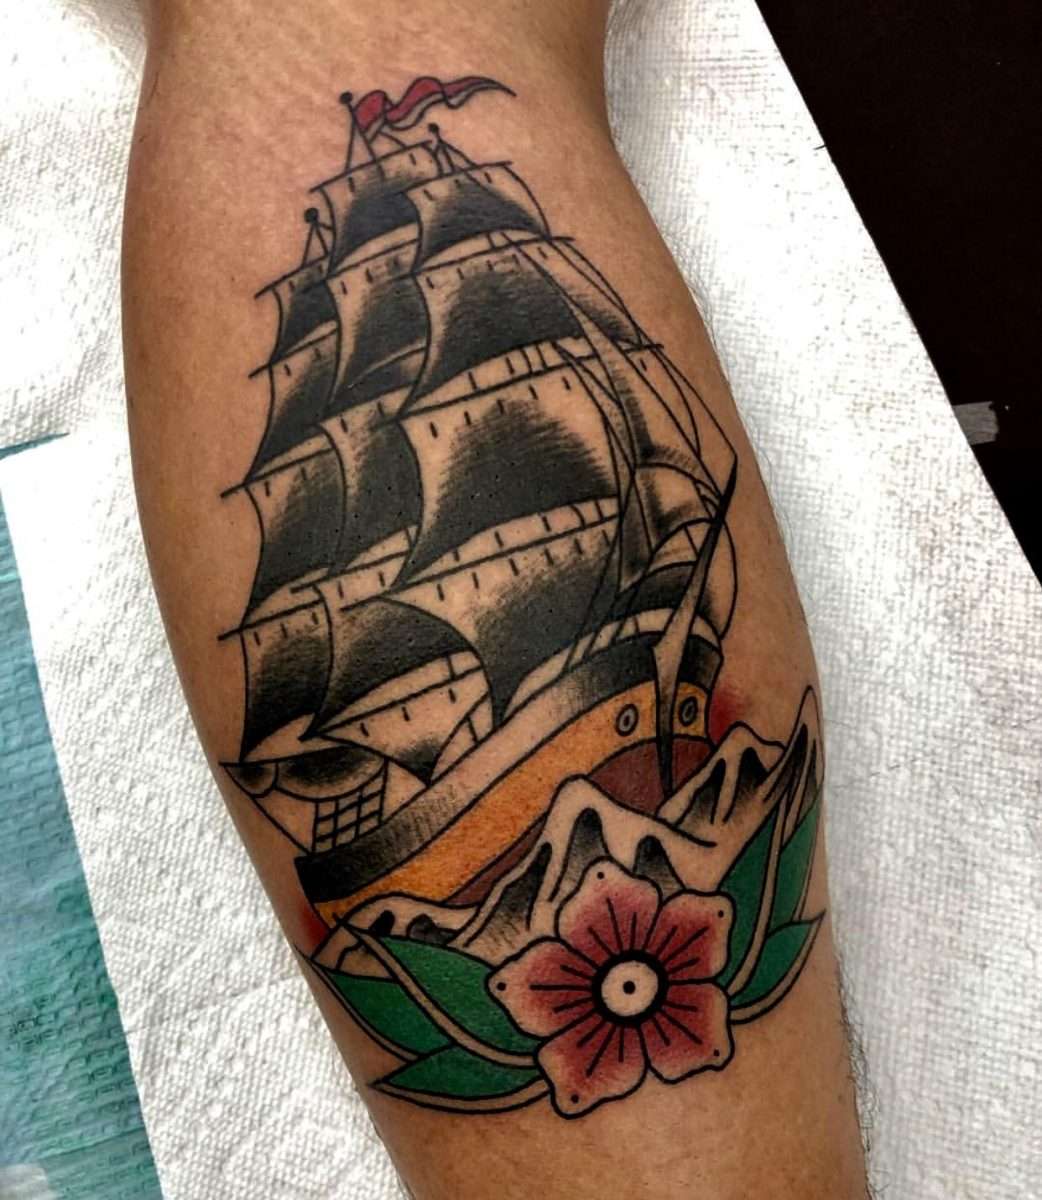 San Diego best traditional tattoo clipper ship (With images ...